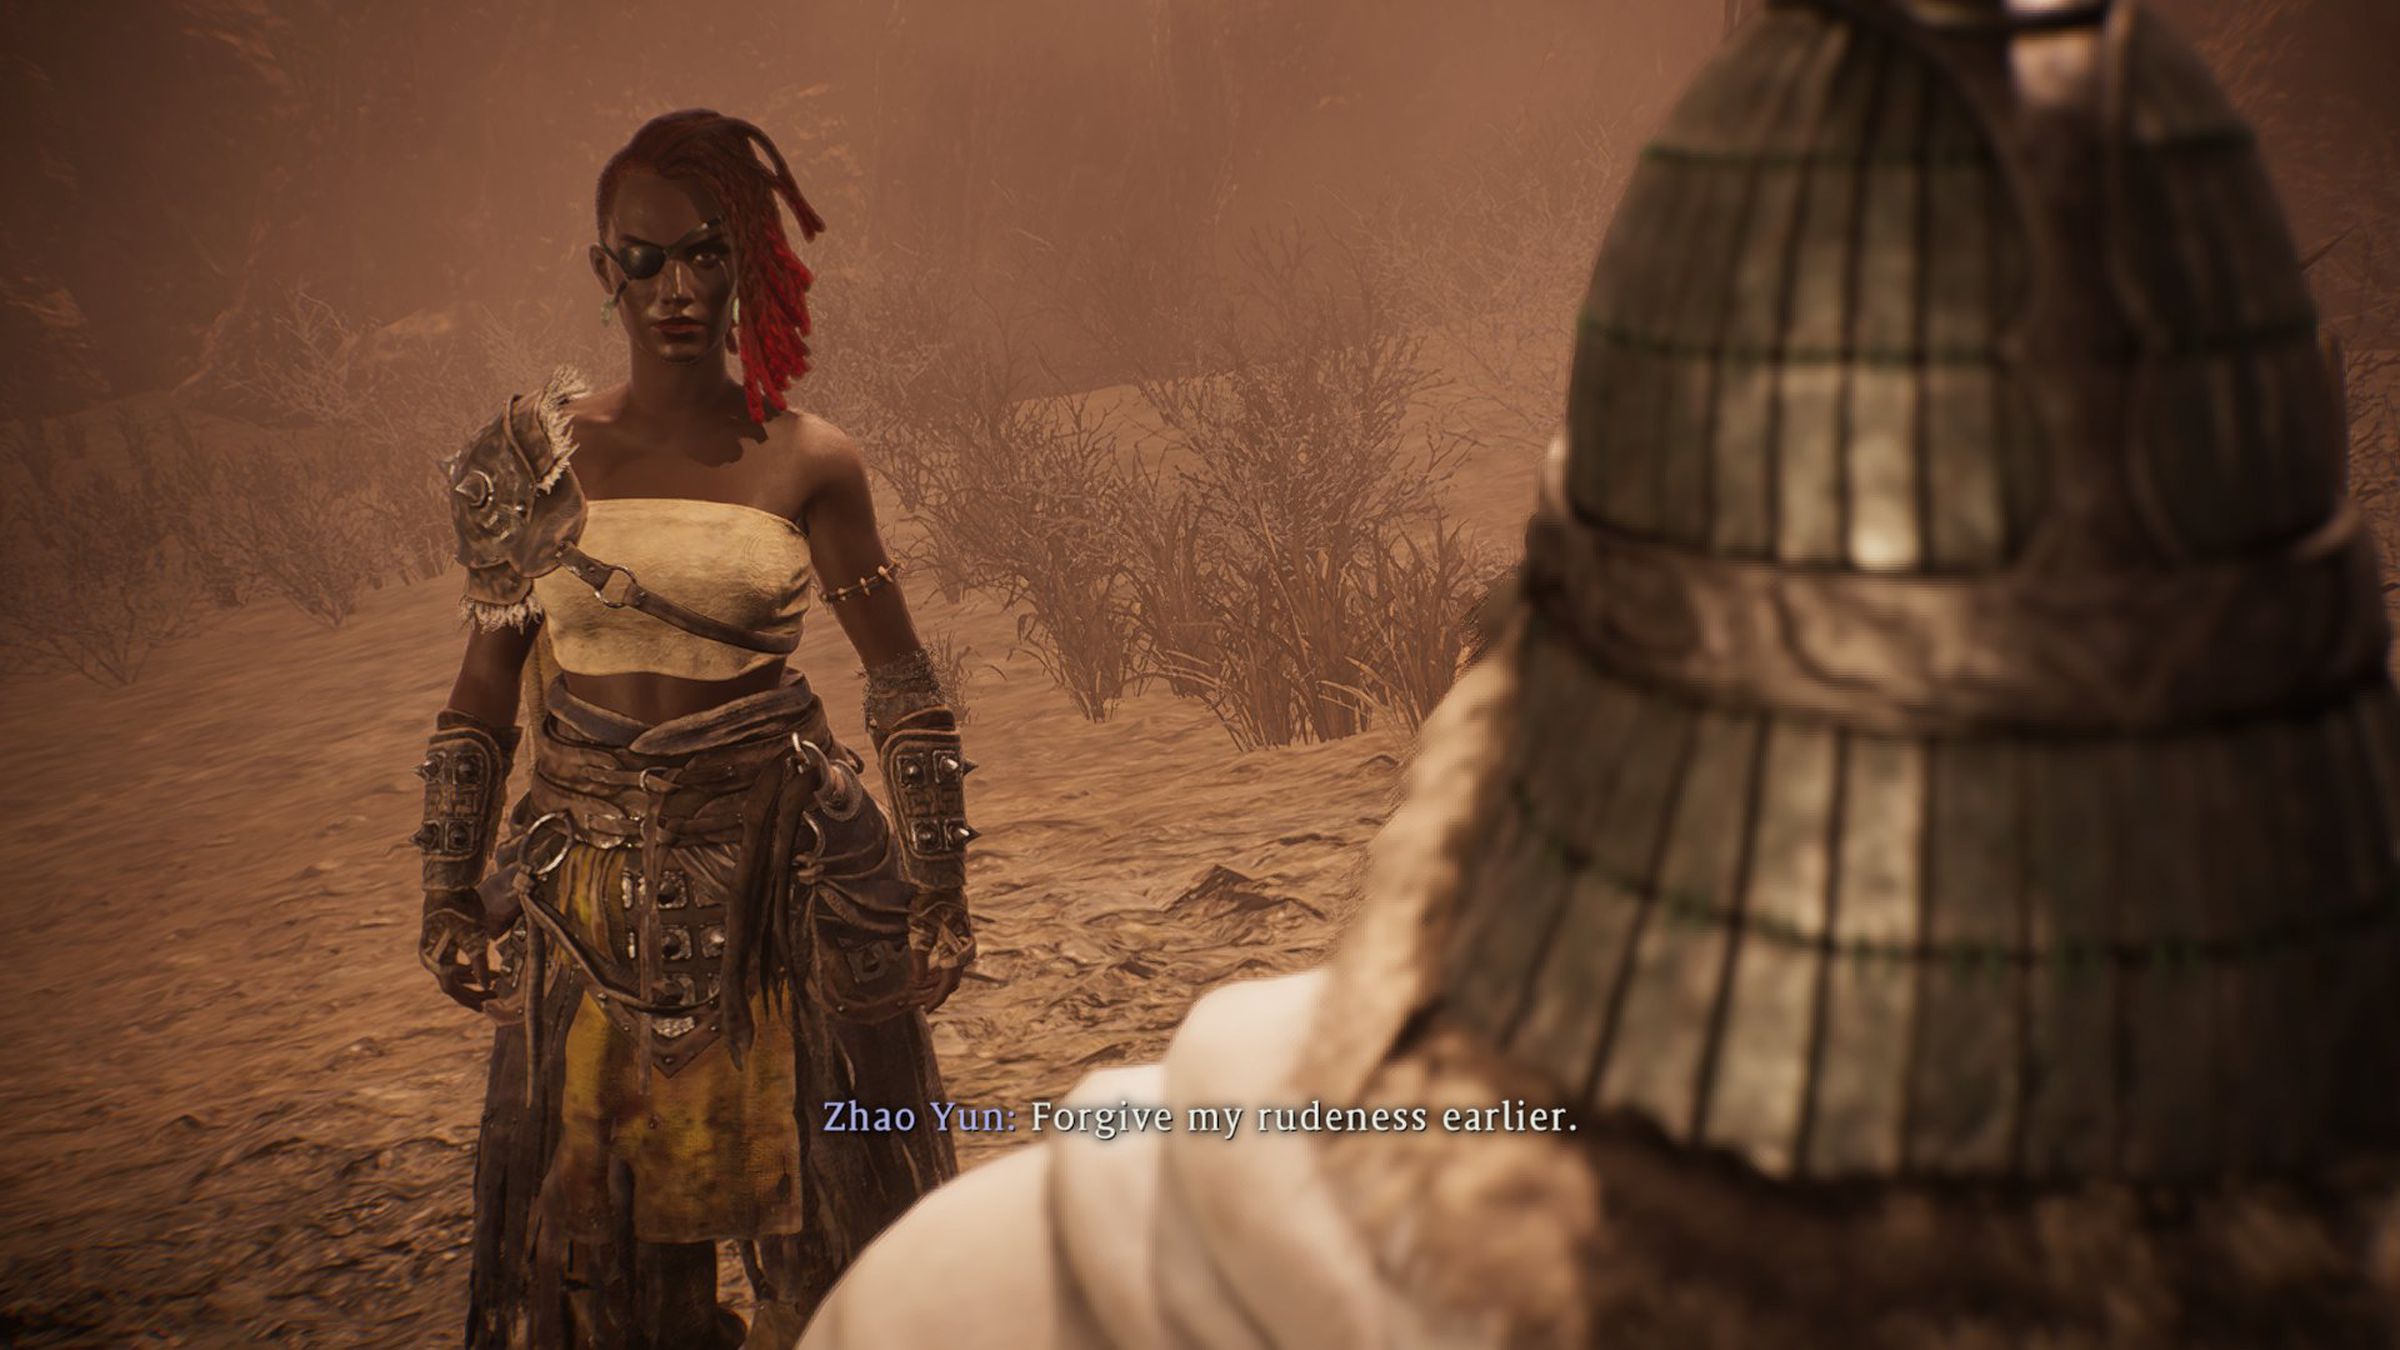 Screenshot from Wo Long: Fallen Dynasty featuring a shot of my player character a muscular Black woman with an eye patch